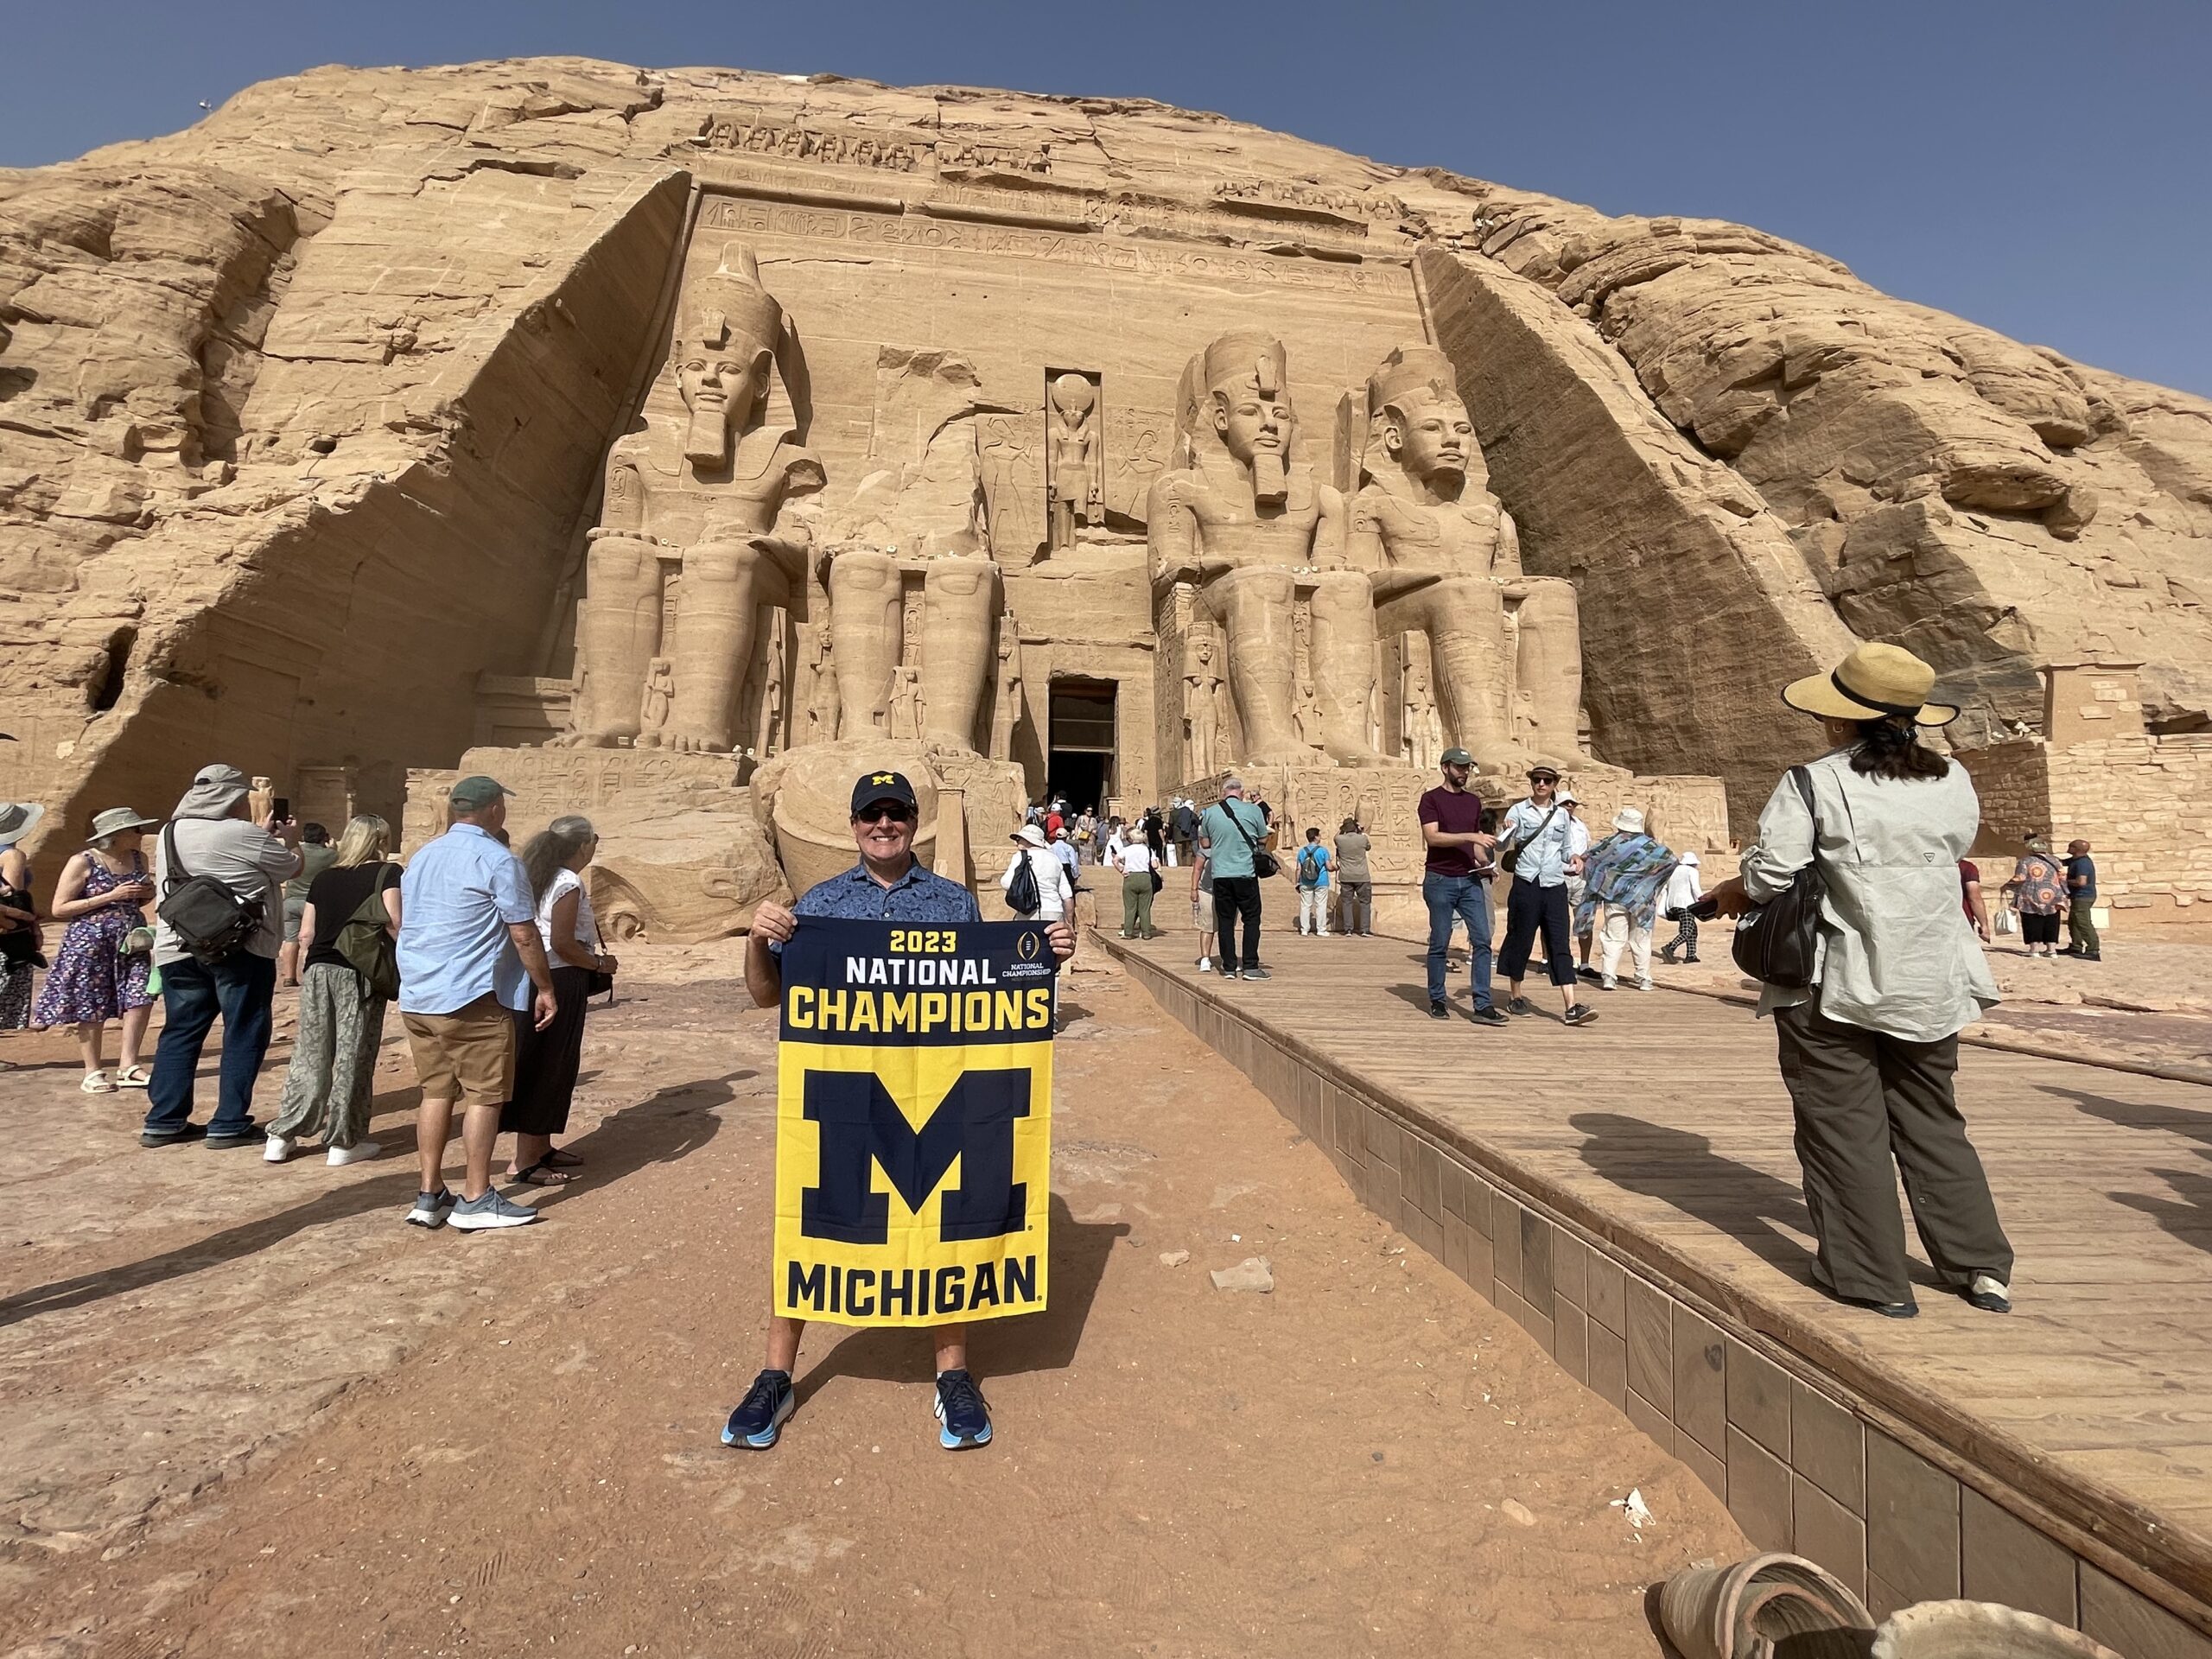 Tom Mathews, MBA’84, unfurled his U-M flag at the feet of the giant statues of the Great Temple of Ramesses II in Abu Simbel, Egypt.